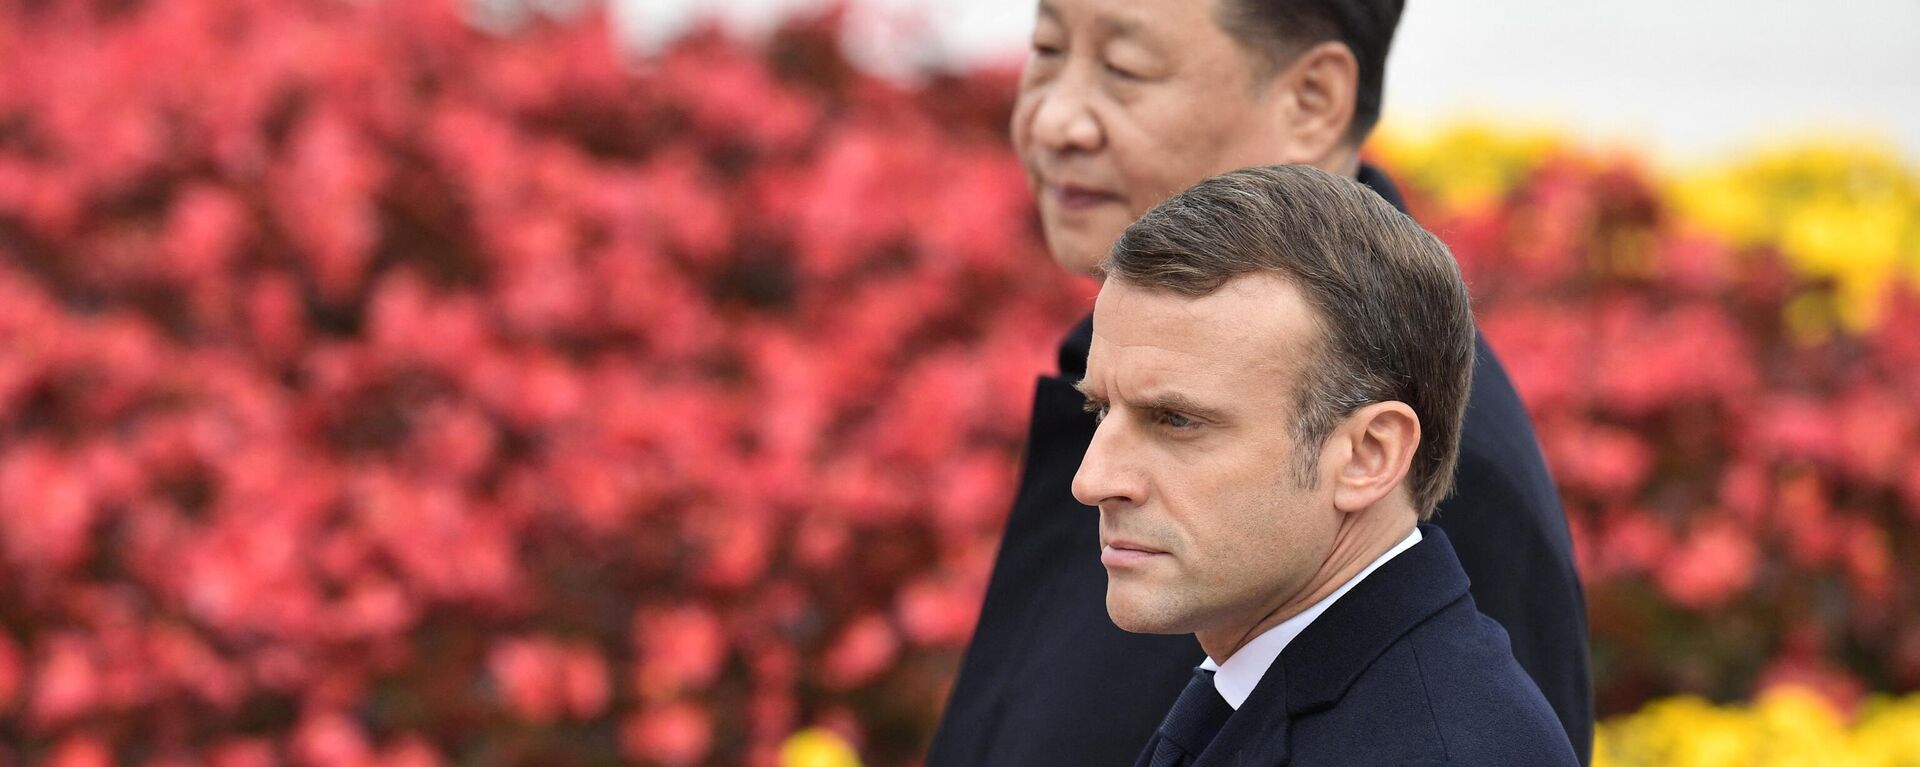 French President Emmanuel Macron walks with Chinese President Xi Jinping during a welcome ceremony at the Great Hall of the People in Beijing, in November 2019. - Sputnik International, 1920, 07.04.2023